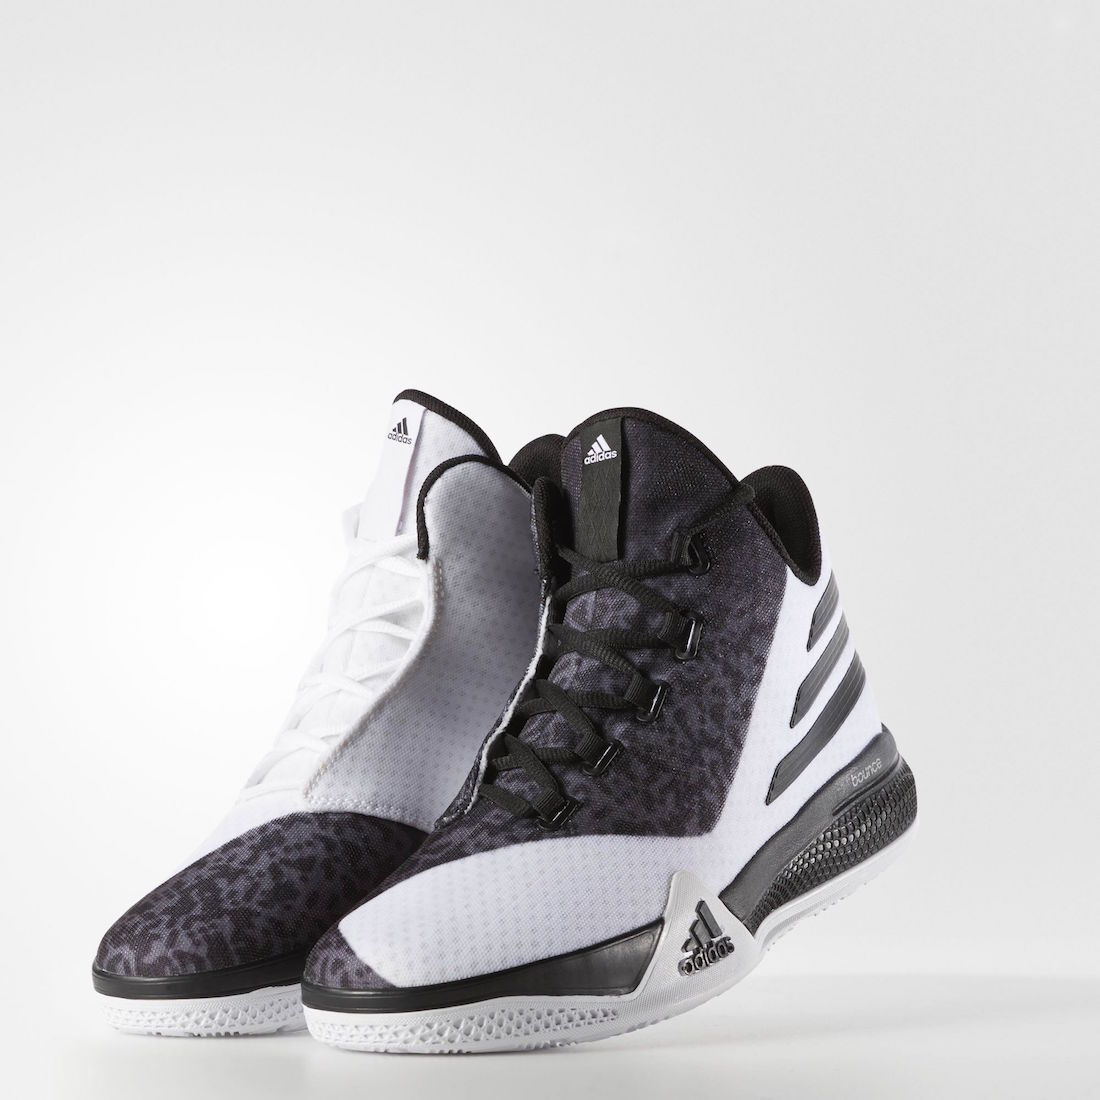 The Adidas Light Em Up 2 0 Is Available Now Weartesters